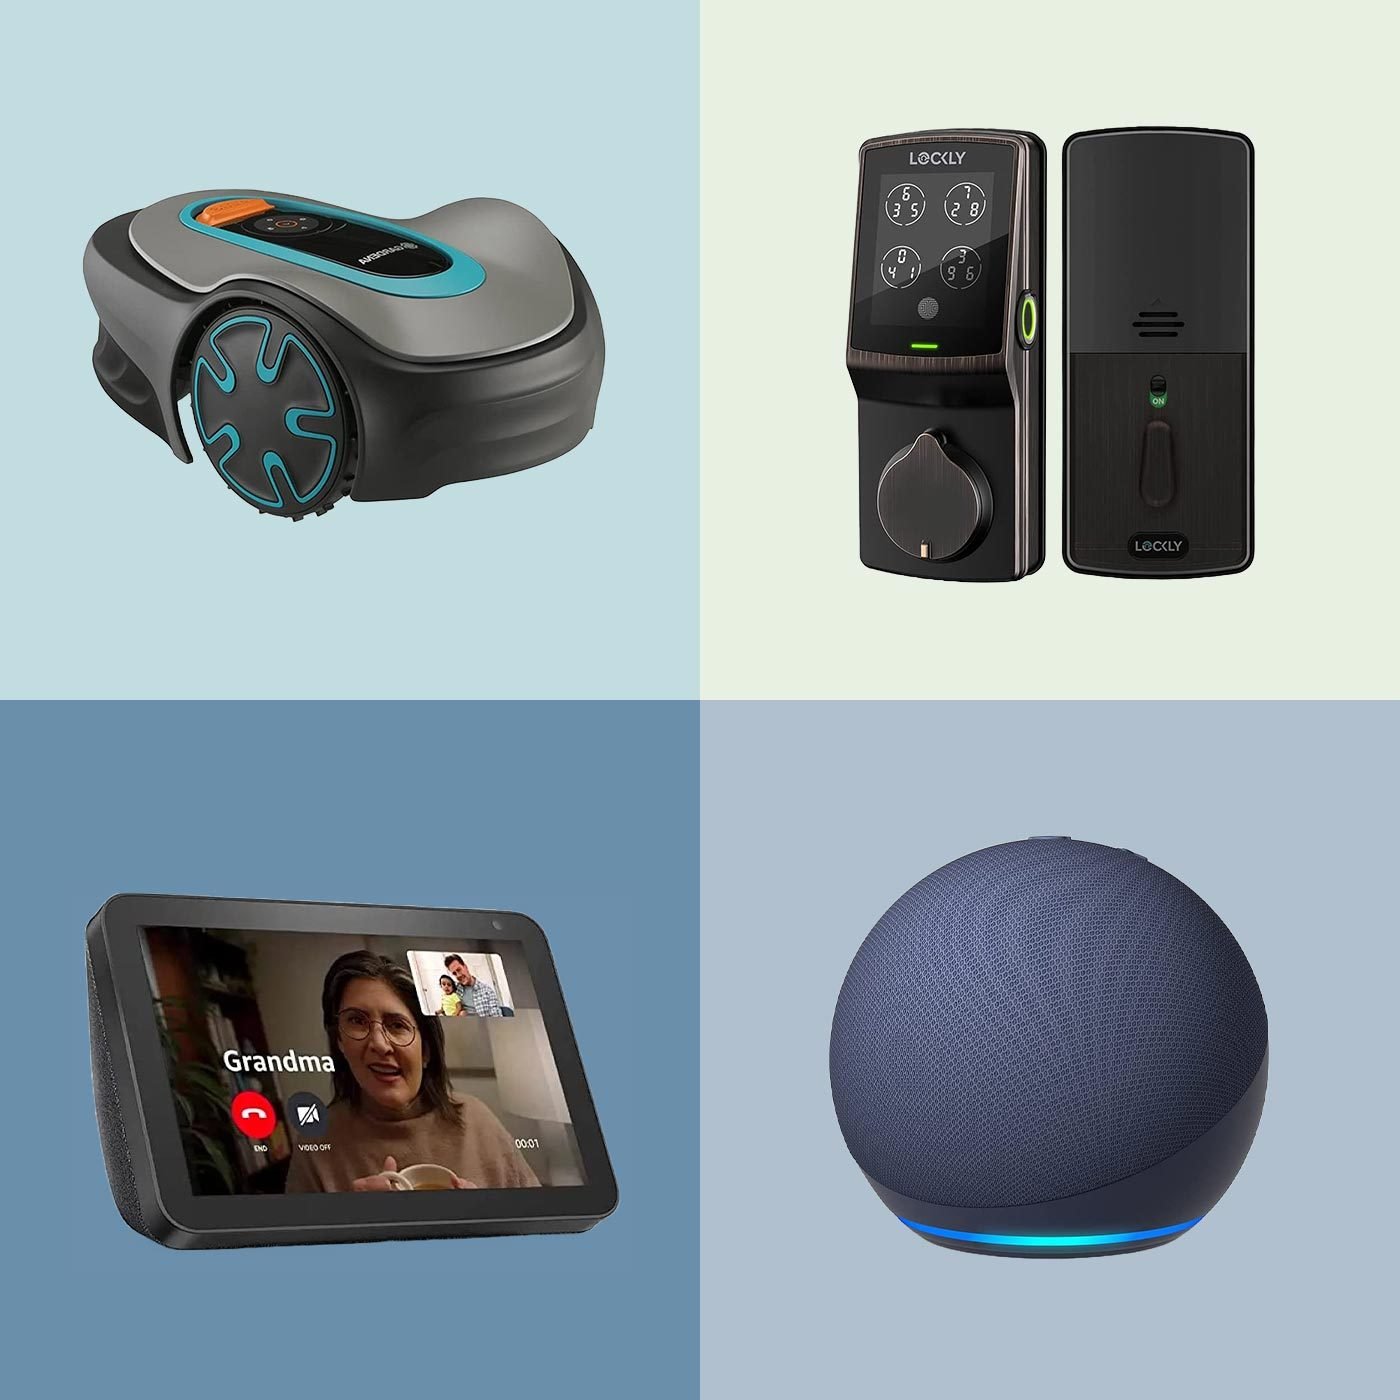 https://www.rd.com/wp-content/uploads/2019/10/The-Best-Smart-Home-Devices-That-Are-Worth-Every-Penny_ft.jpg?fit=700%2C700